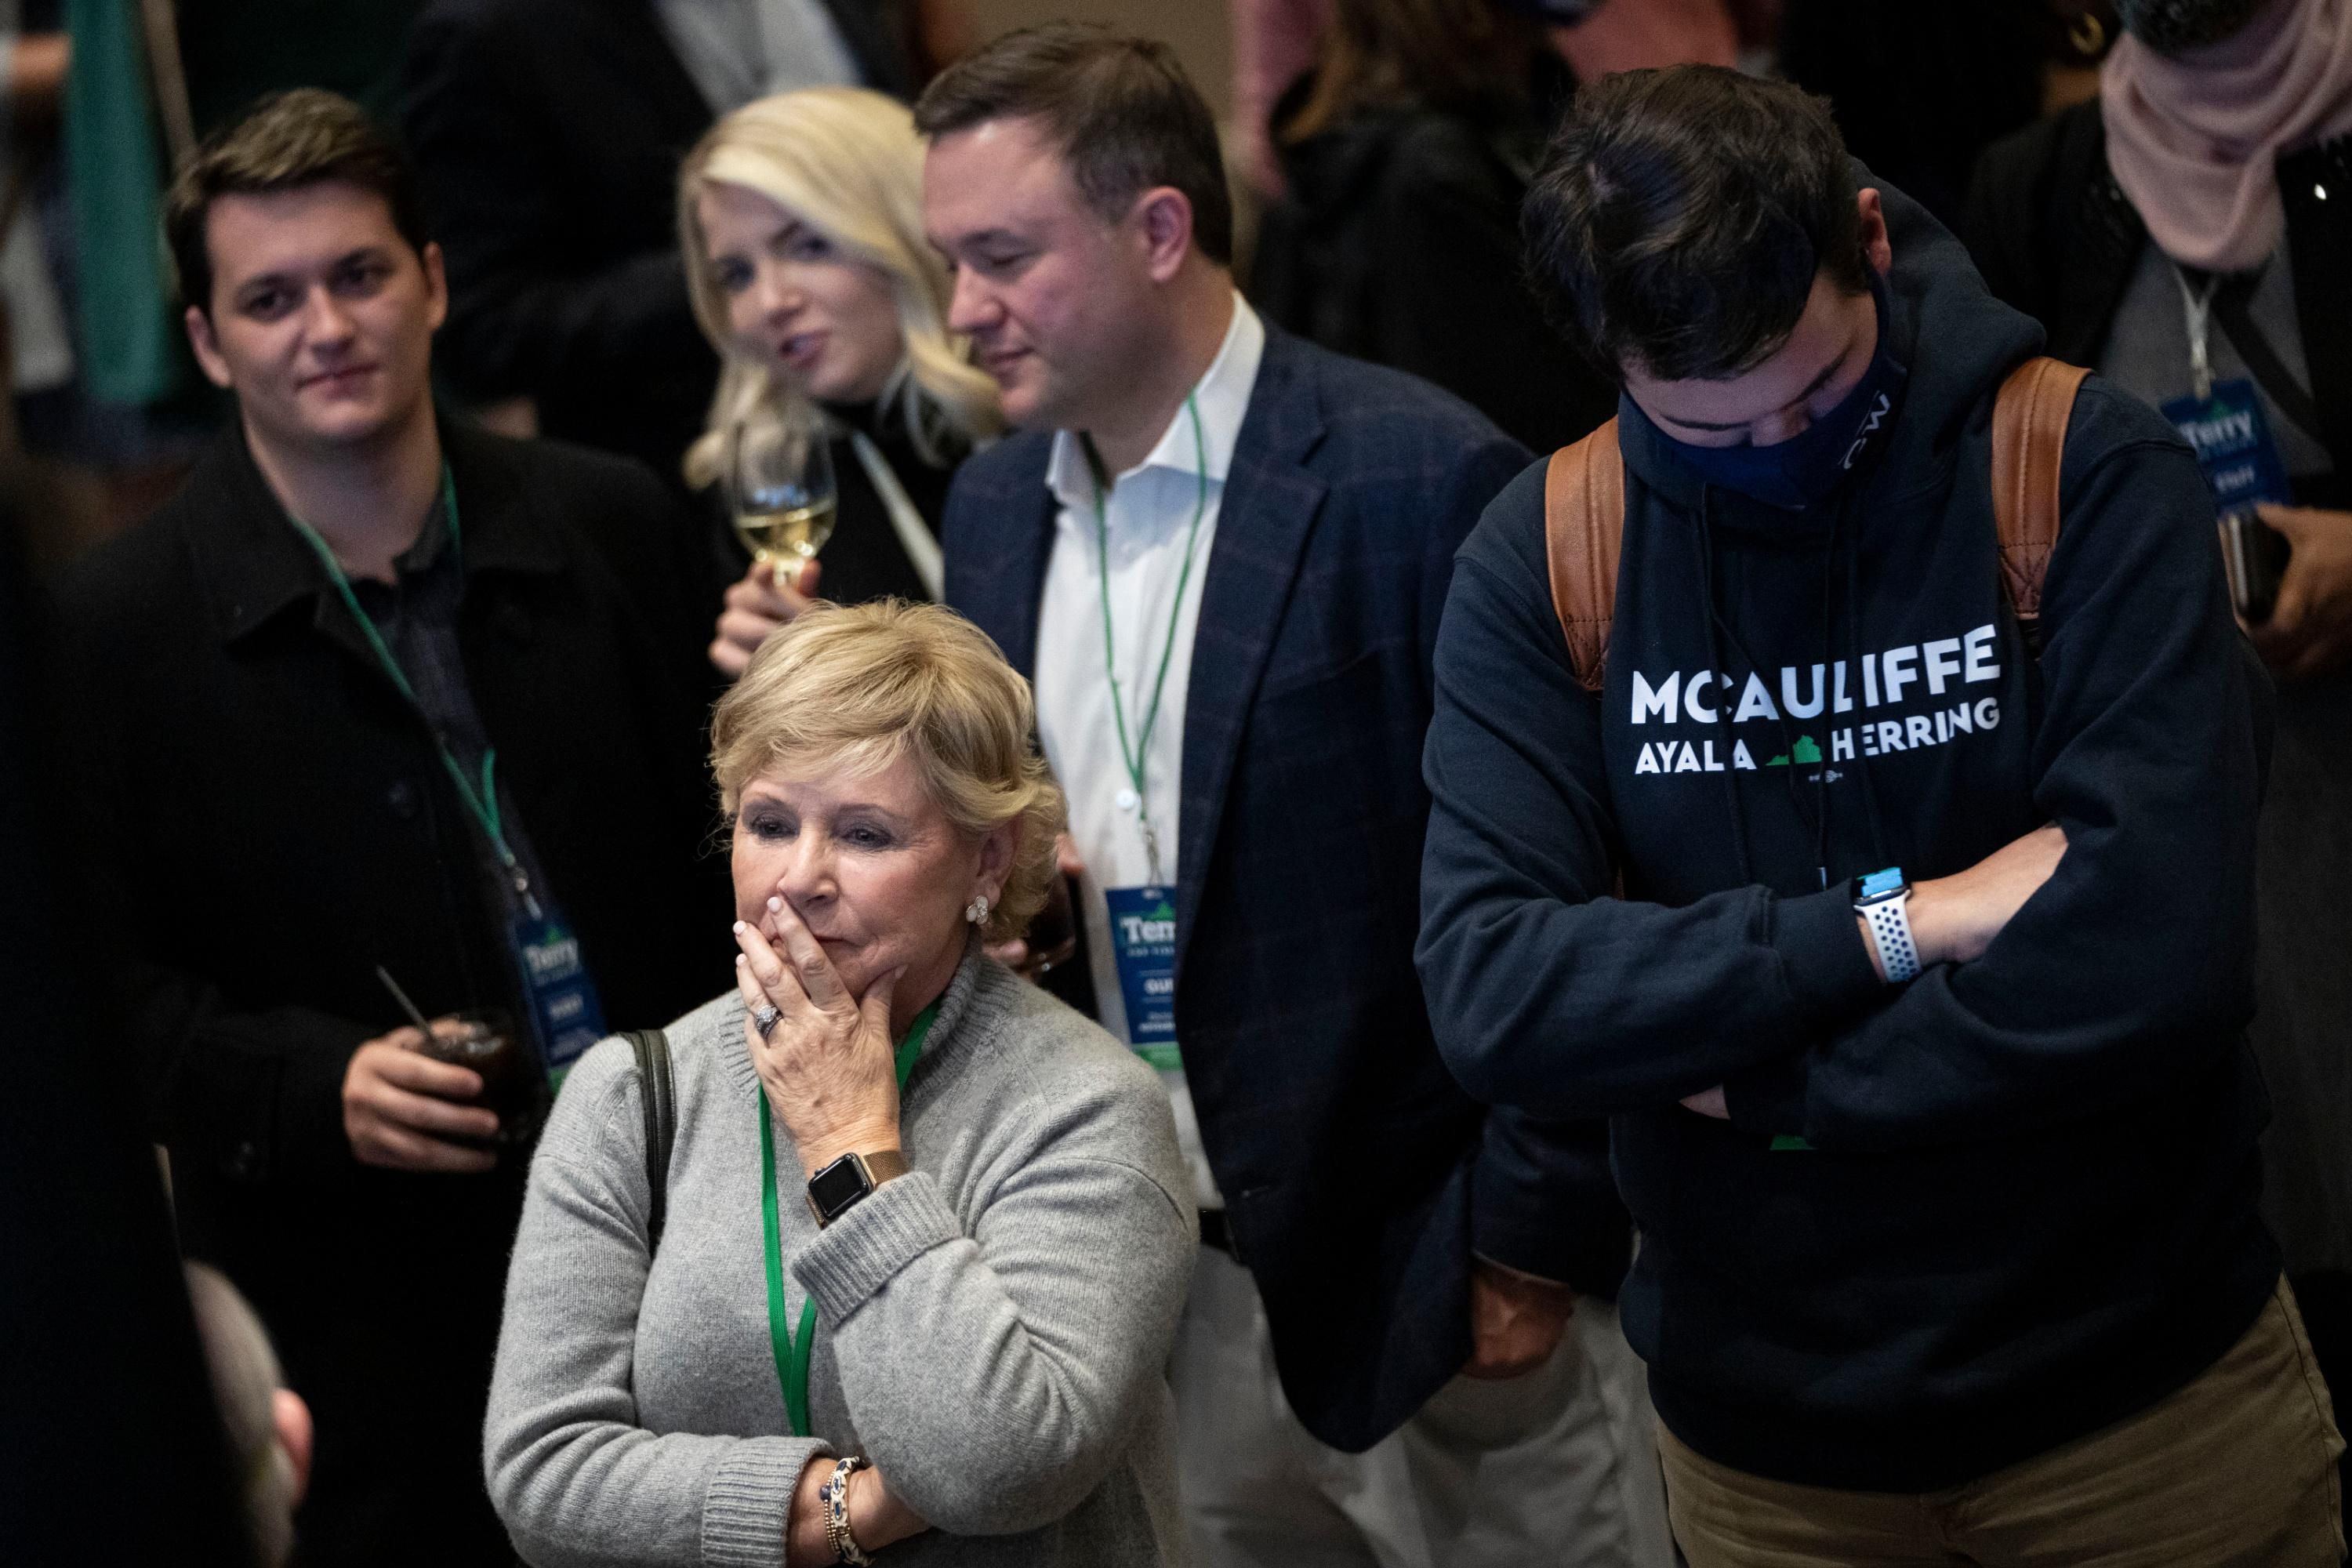 Supporters of Terry McAuliffe look on